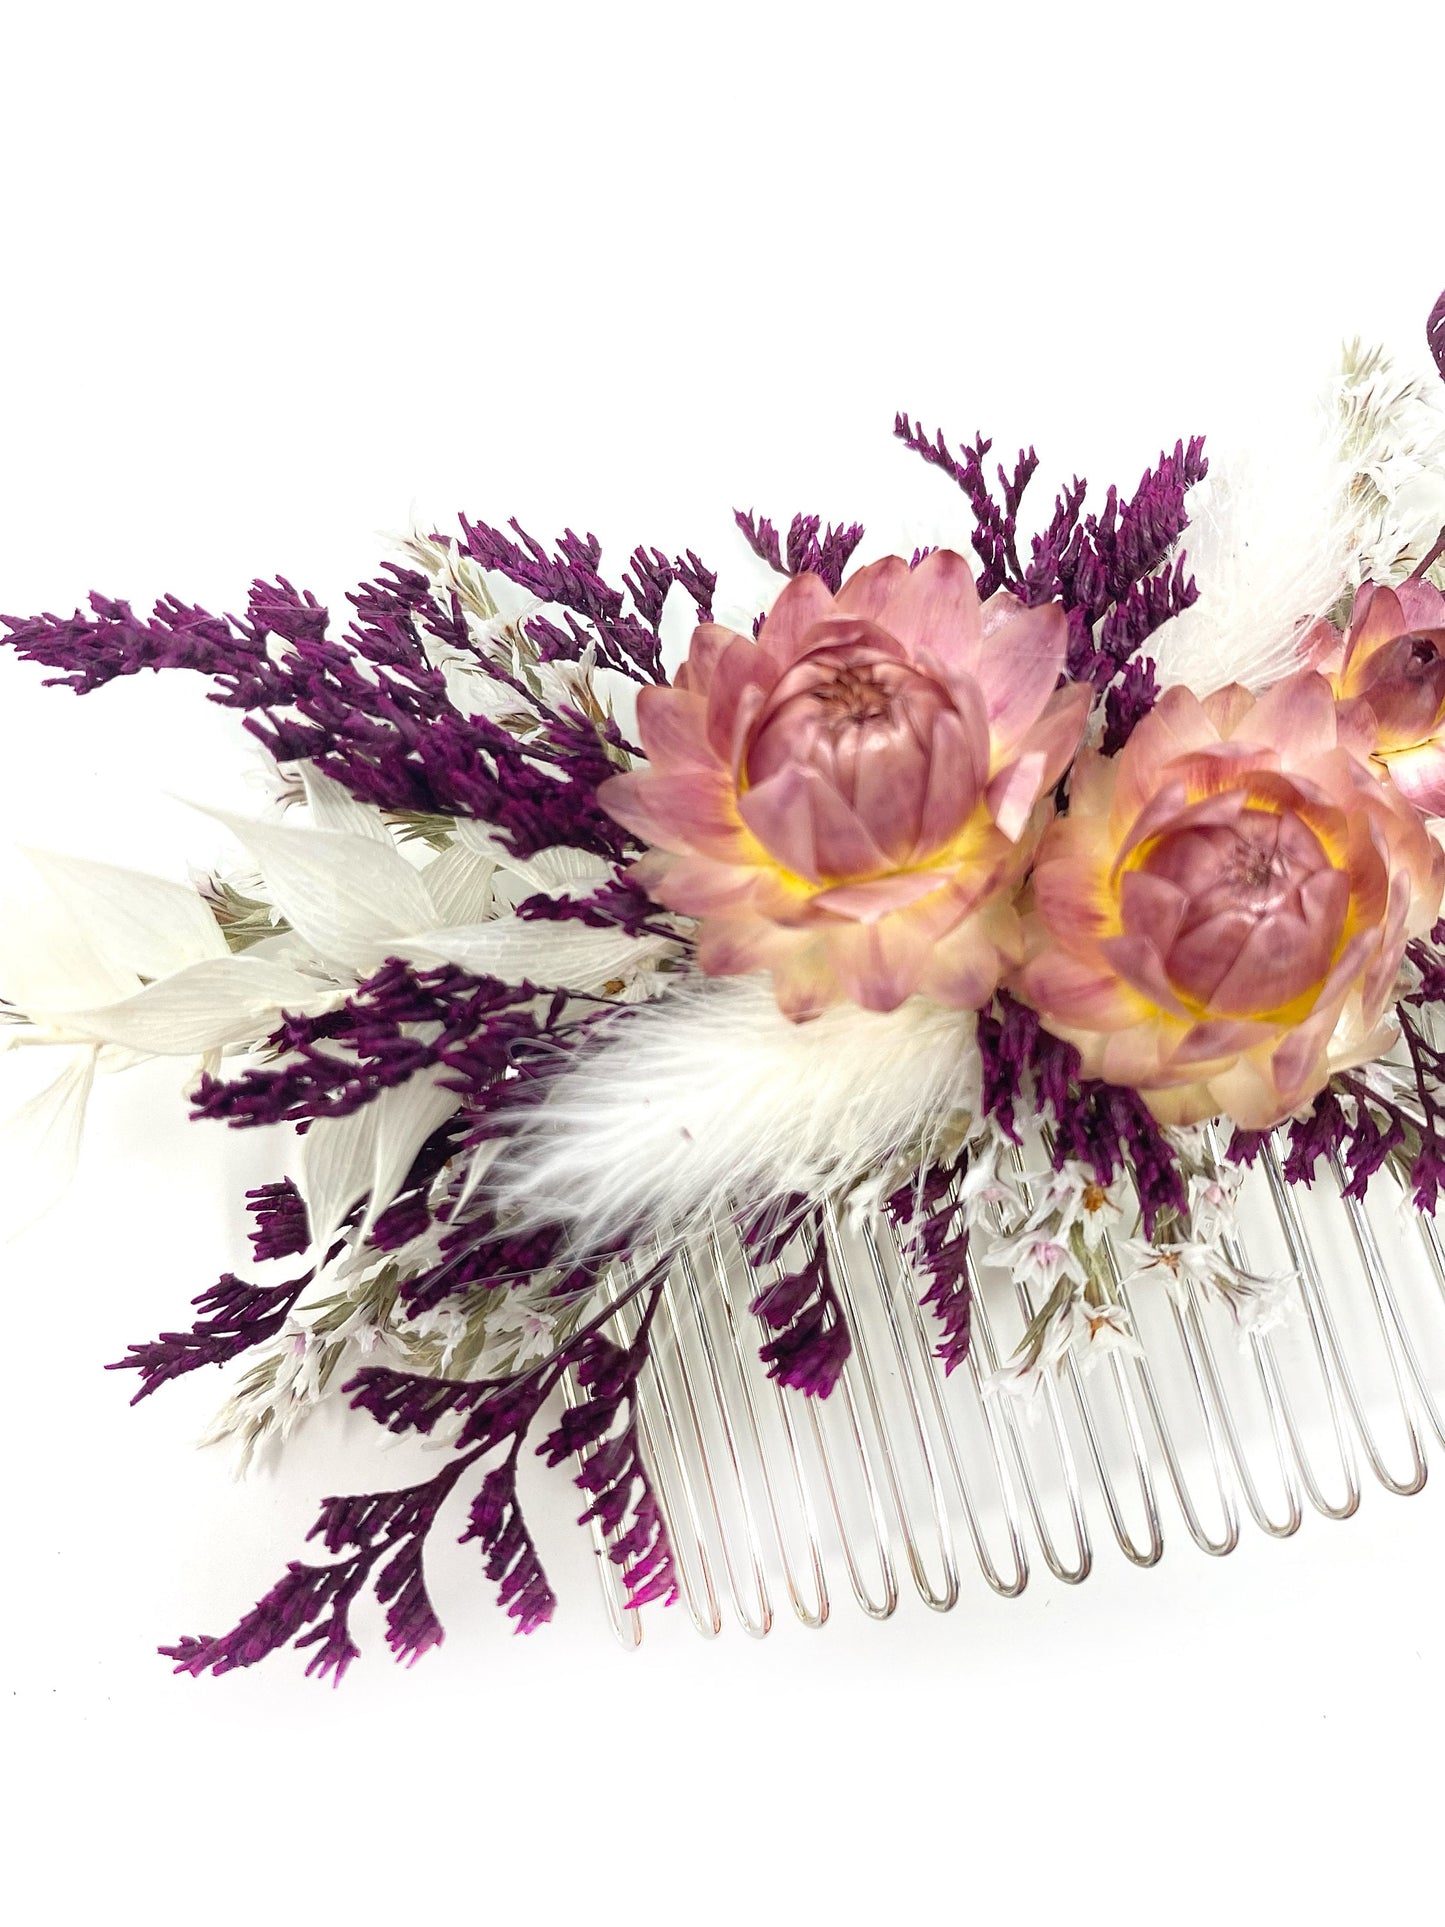 Hair Comb, Hair Pins, Dried flowers, Preserved, Floral Comb, Clip, Wedding, Corsage, Prom, Bridal, Purple, Pink, White, Ruscus,  Summer